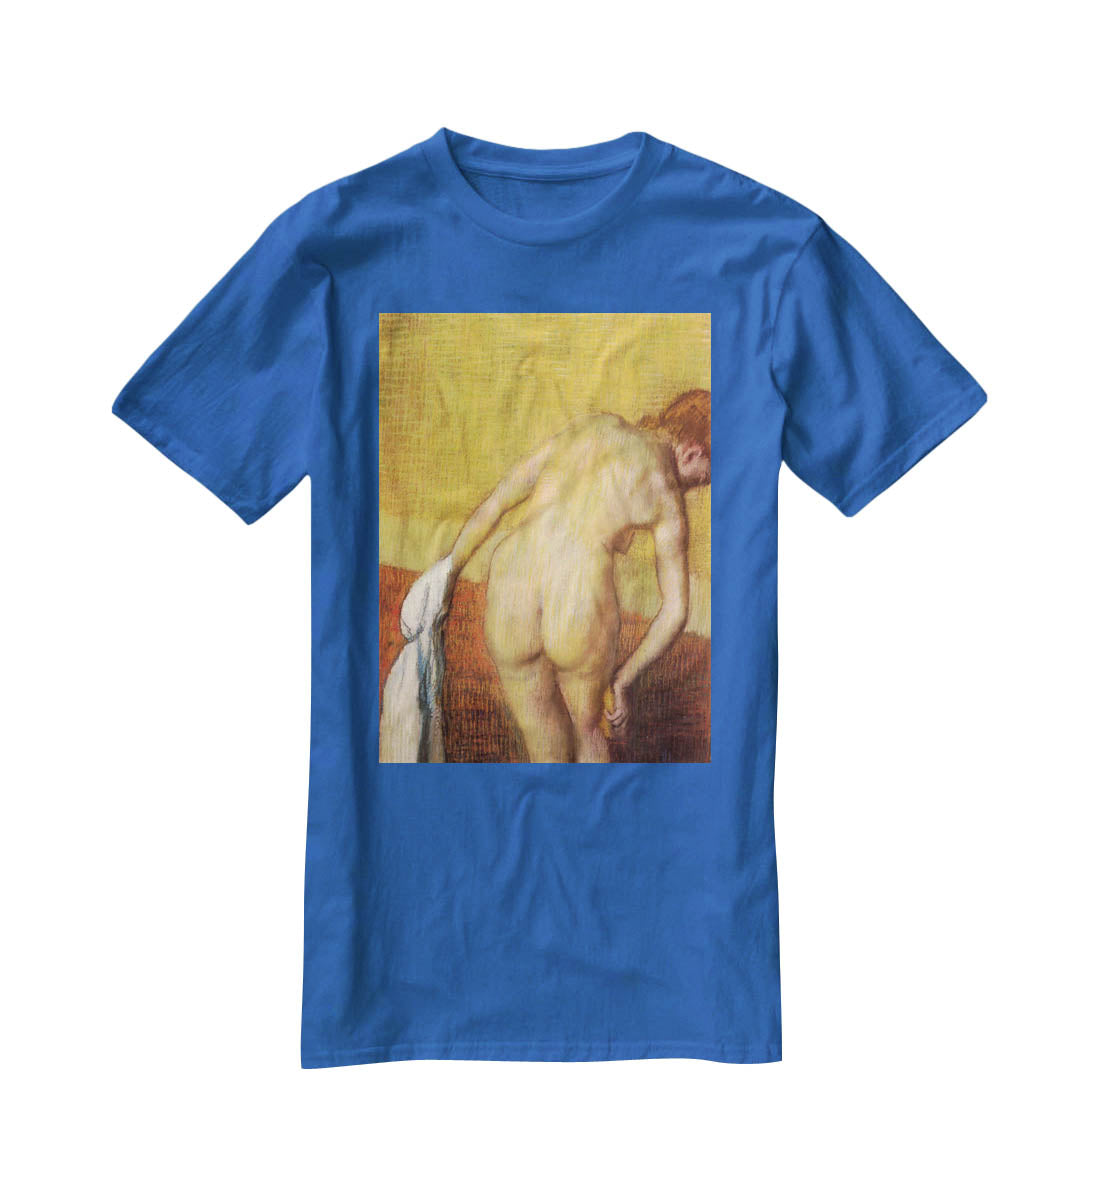 Woman Drying with towel and sponge by Degas T-Shirt - Canvas Art Rocks - 2